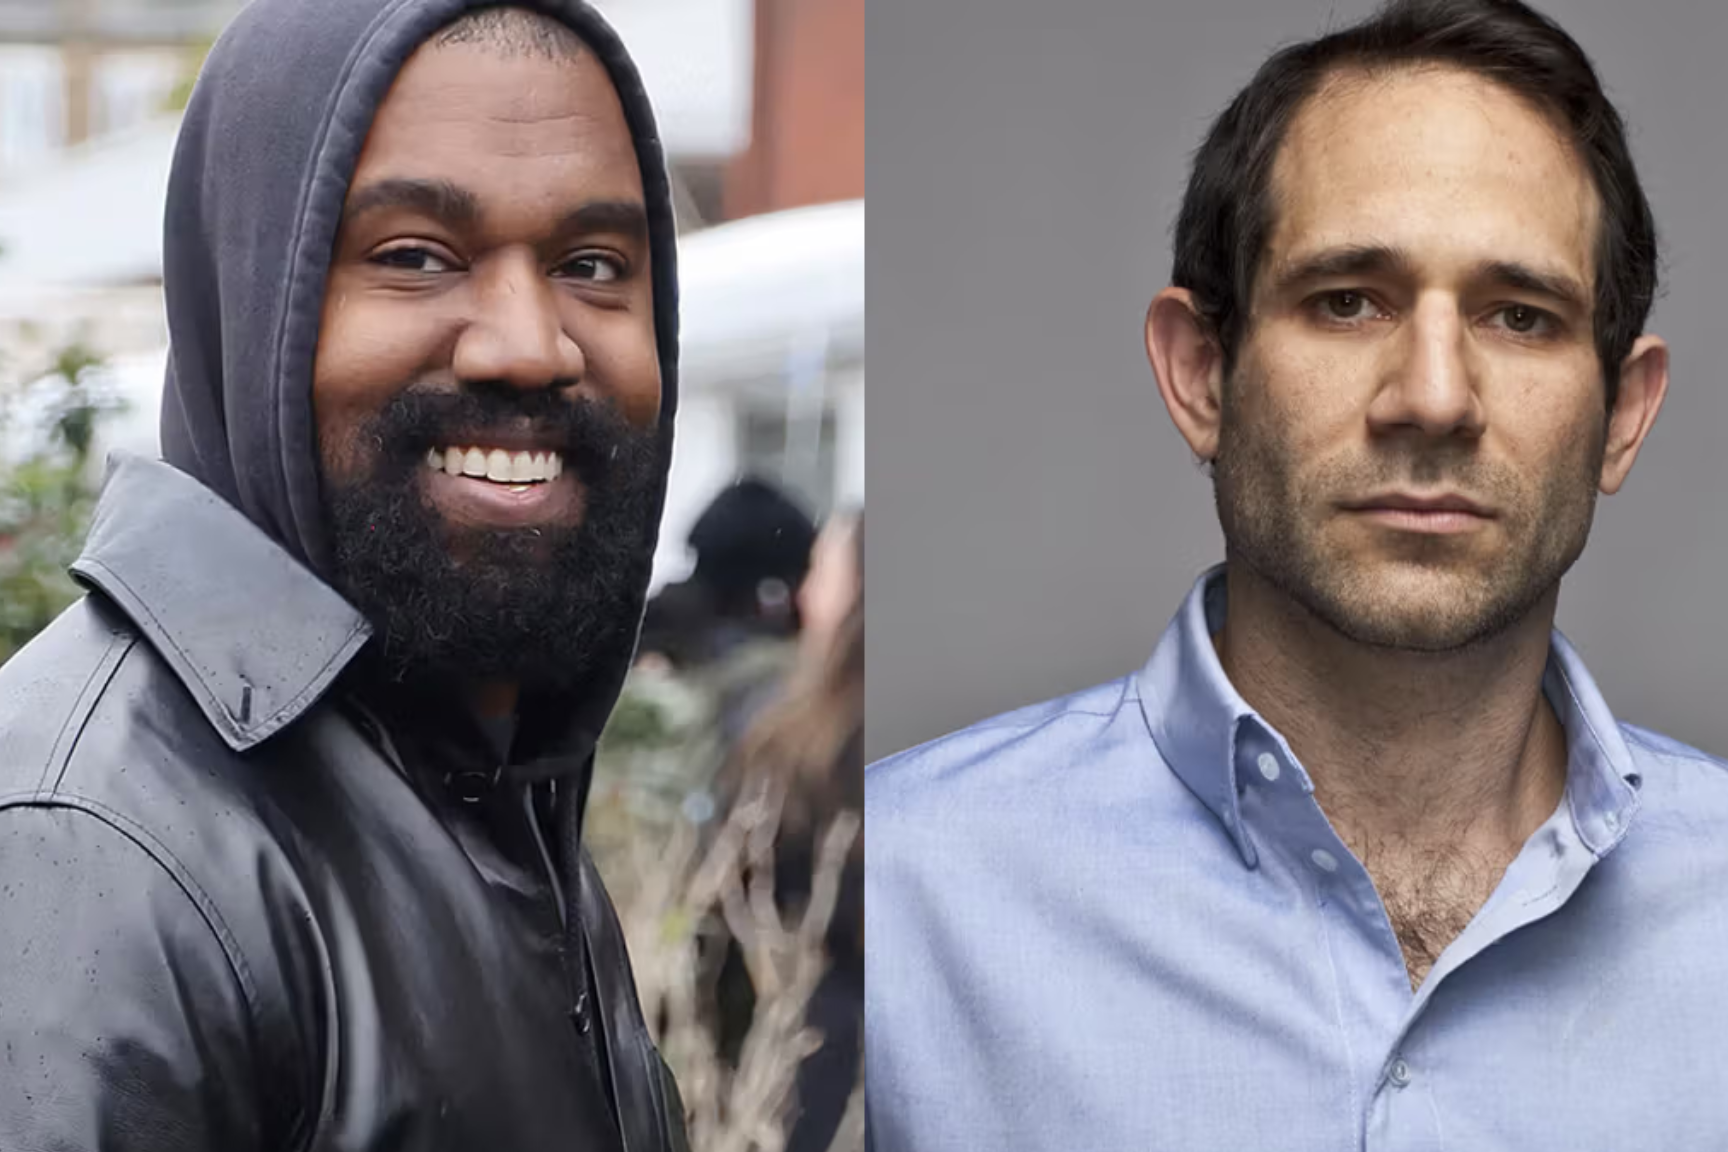 Ye Reportedly Taps American Apparel's Dov Charney as YEEZY CEO